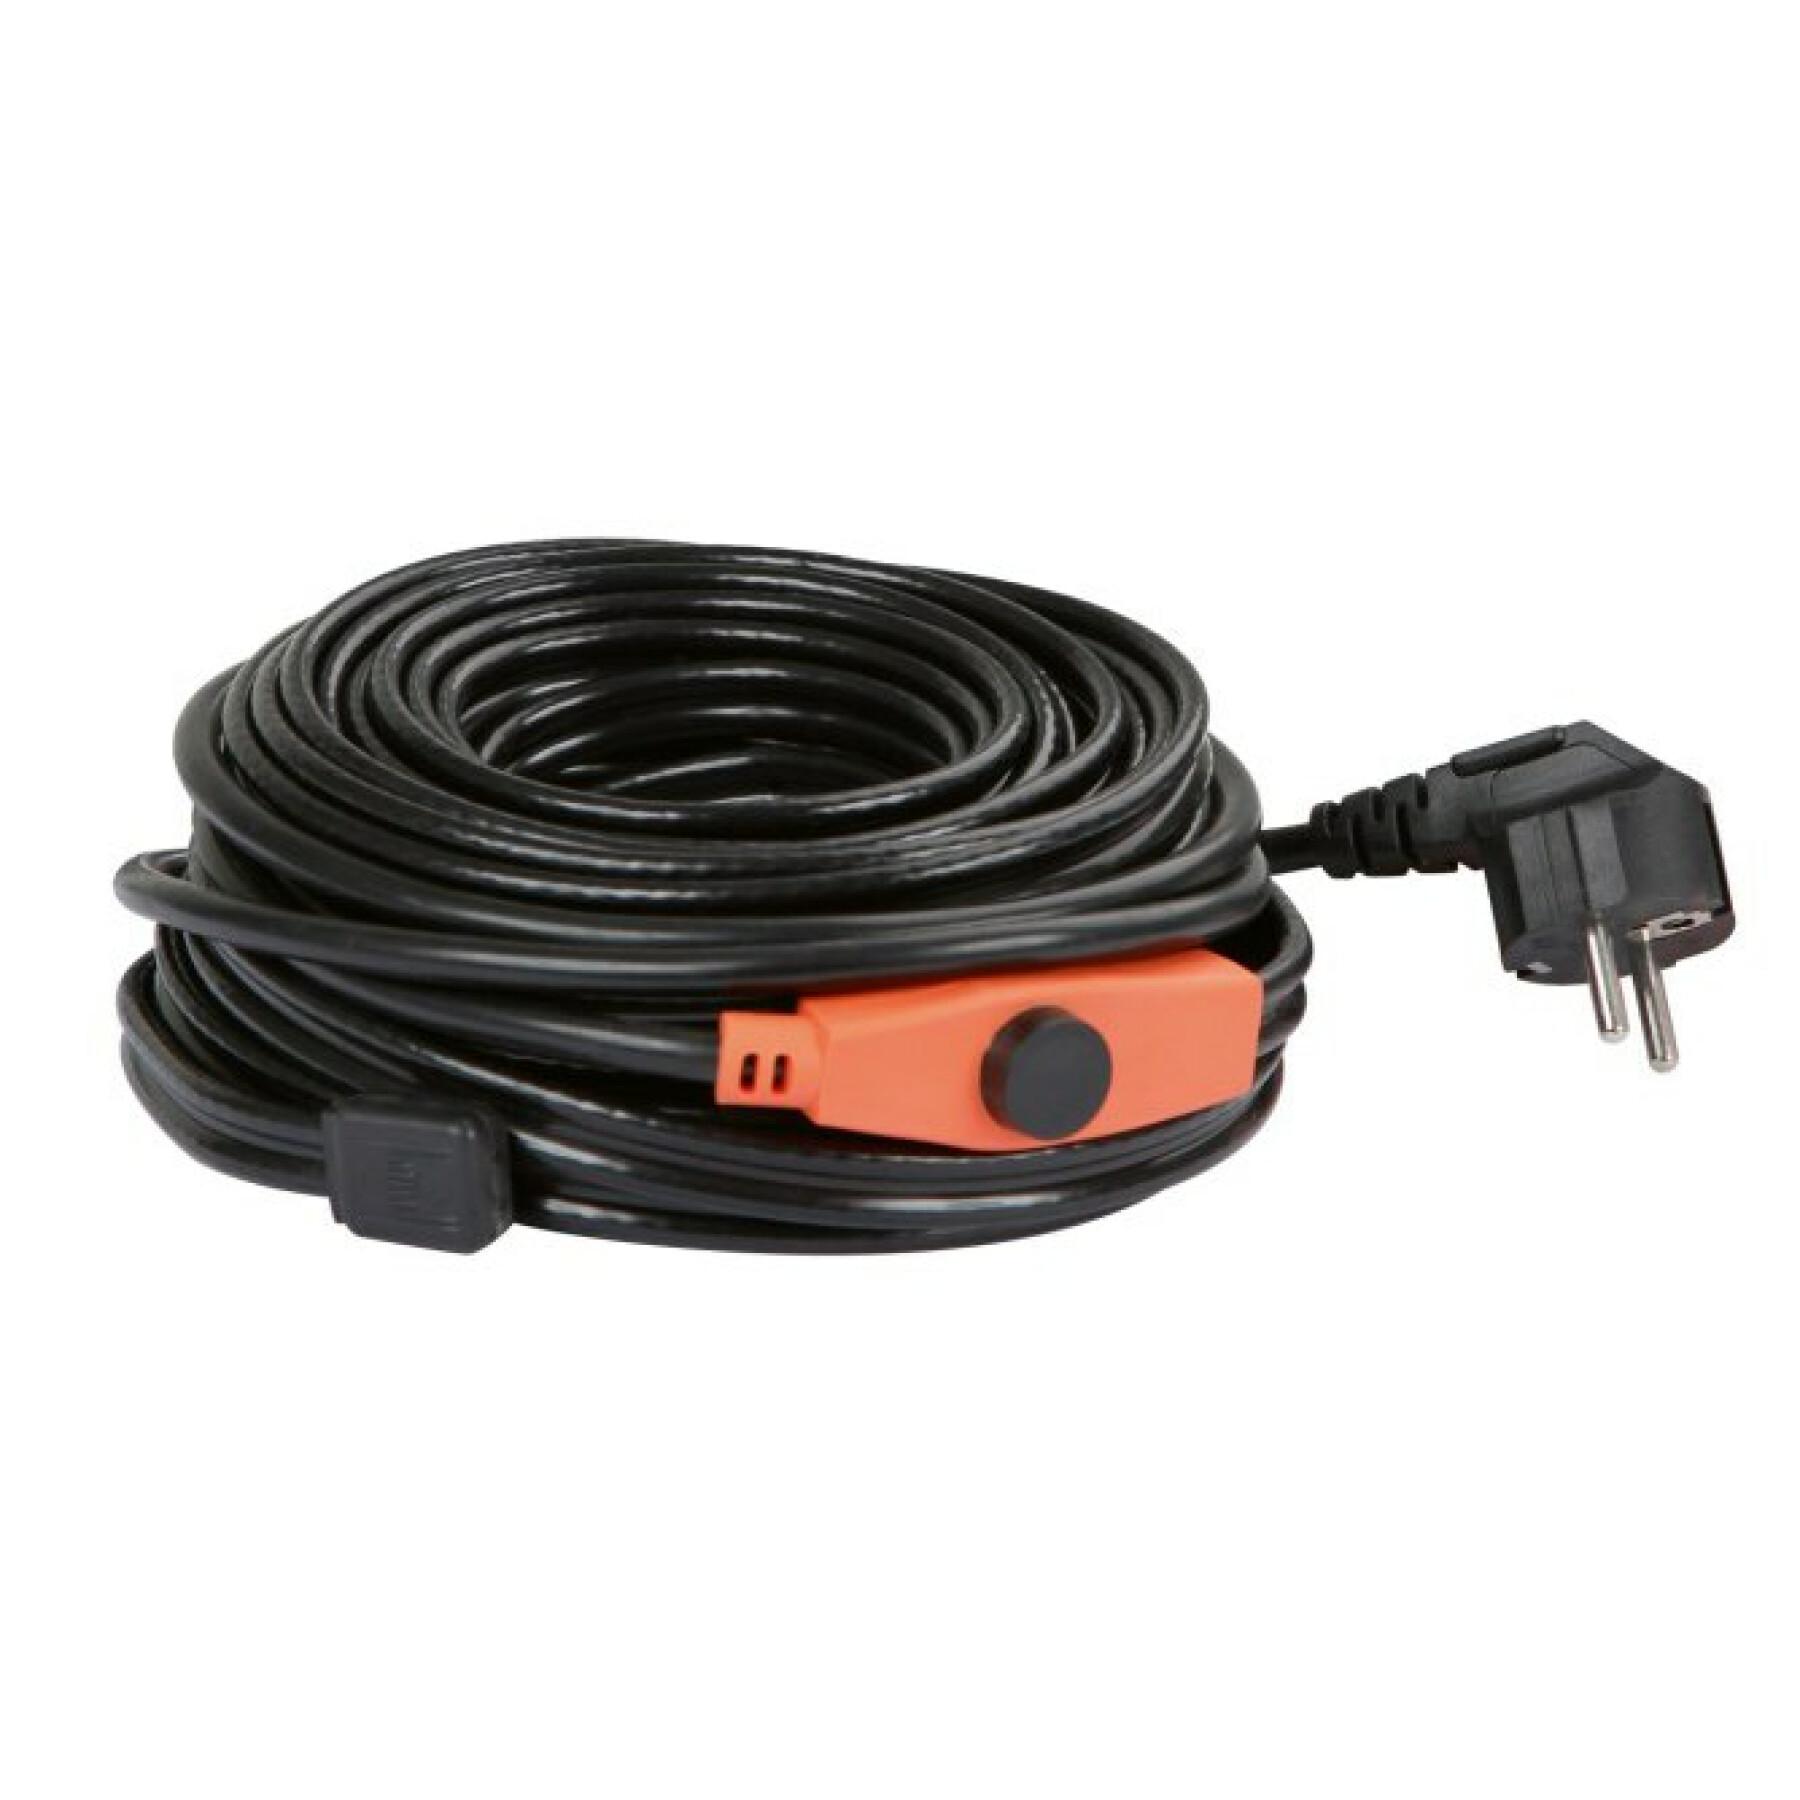 Heating cable Kerbl 230V 14m,224W